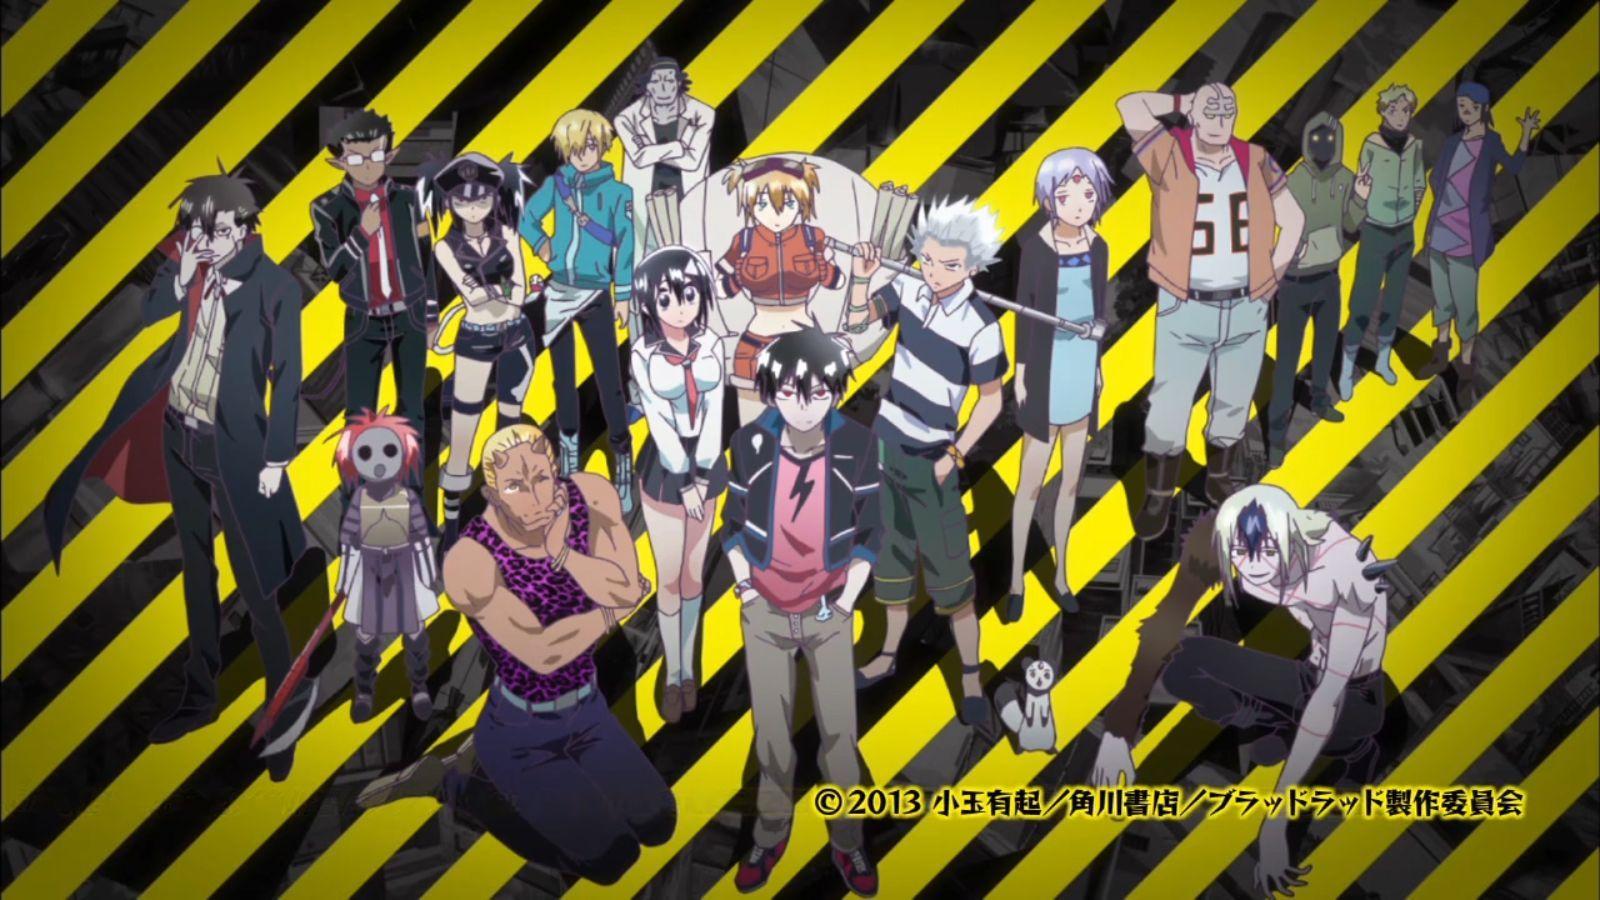 Blood Lad fan thread. Discussion